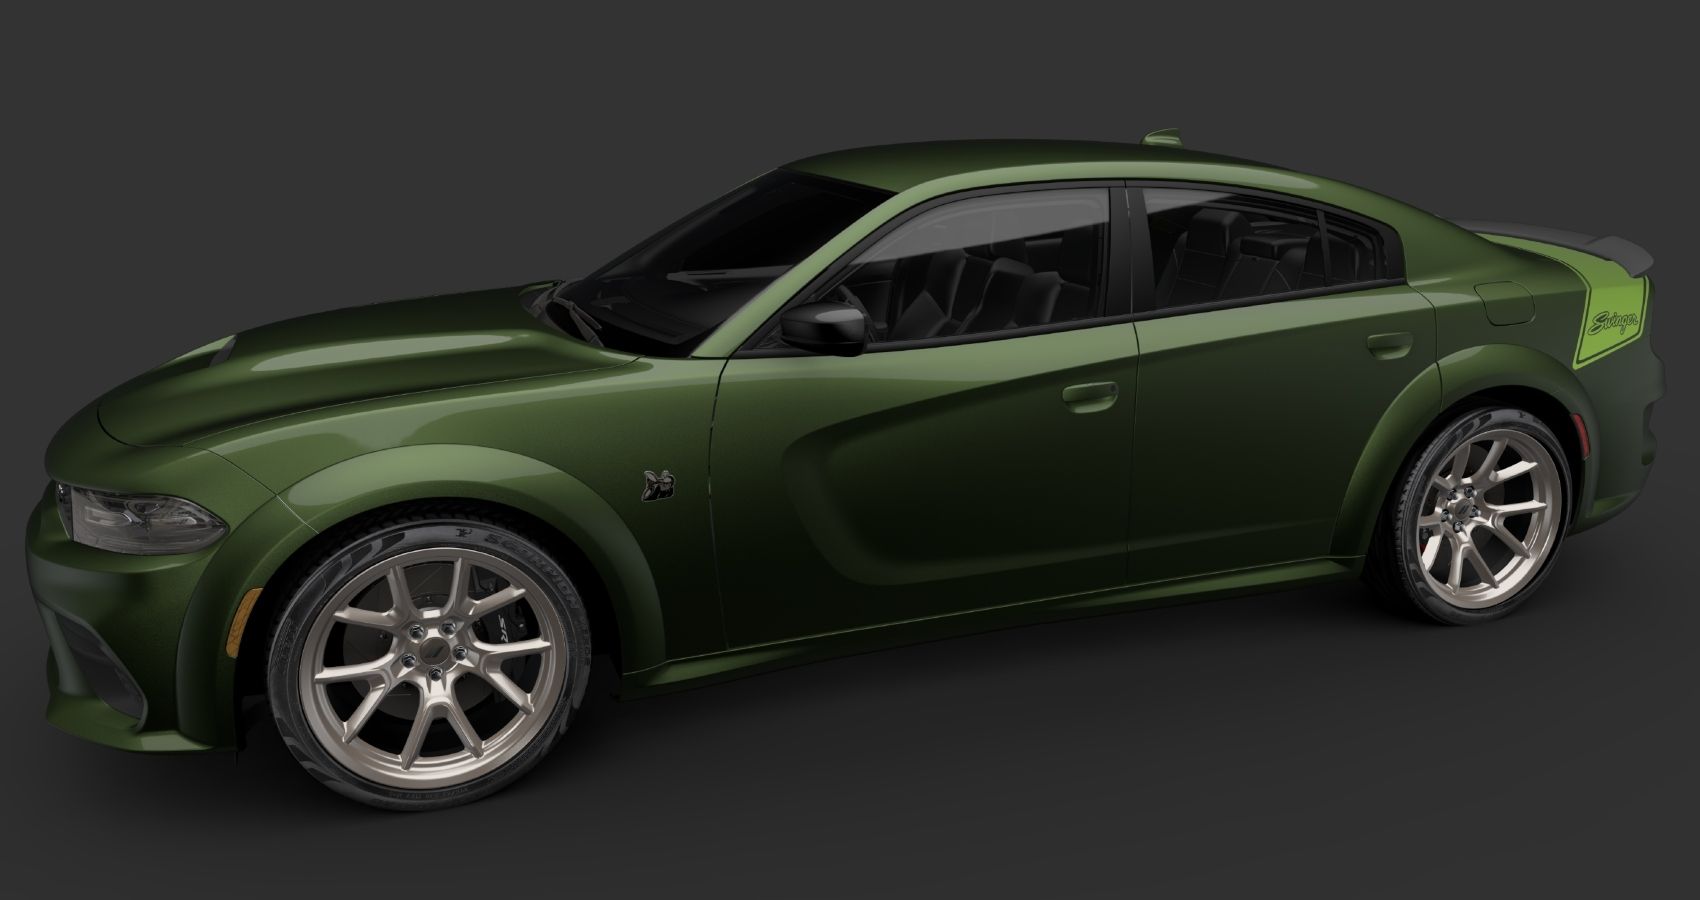 The 2023 Dodge Charger Scat Pack Swinger Revives Retro Essence Among FourDoor Muscle Cars